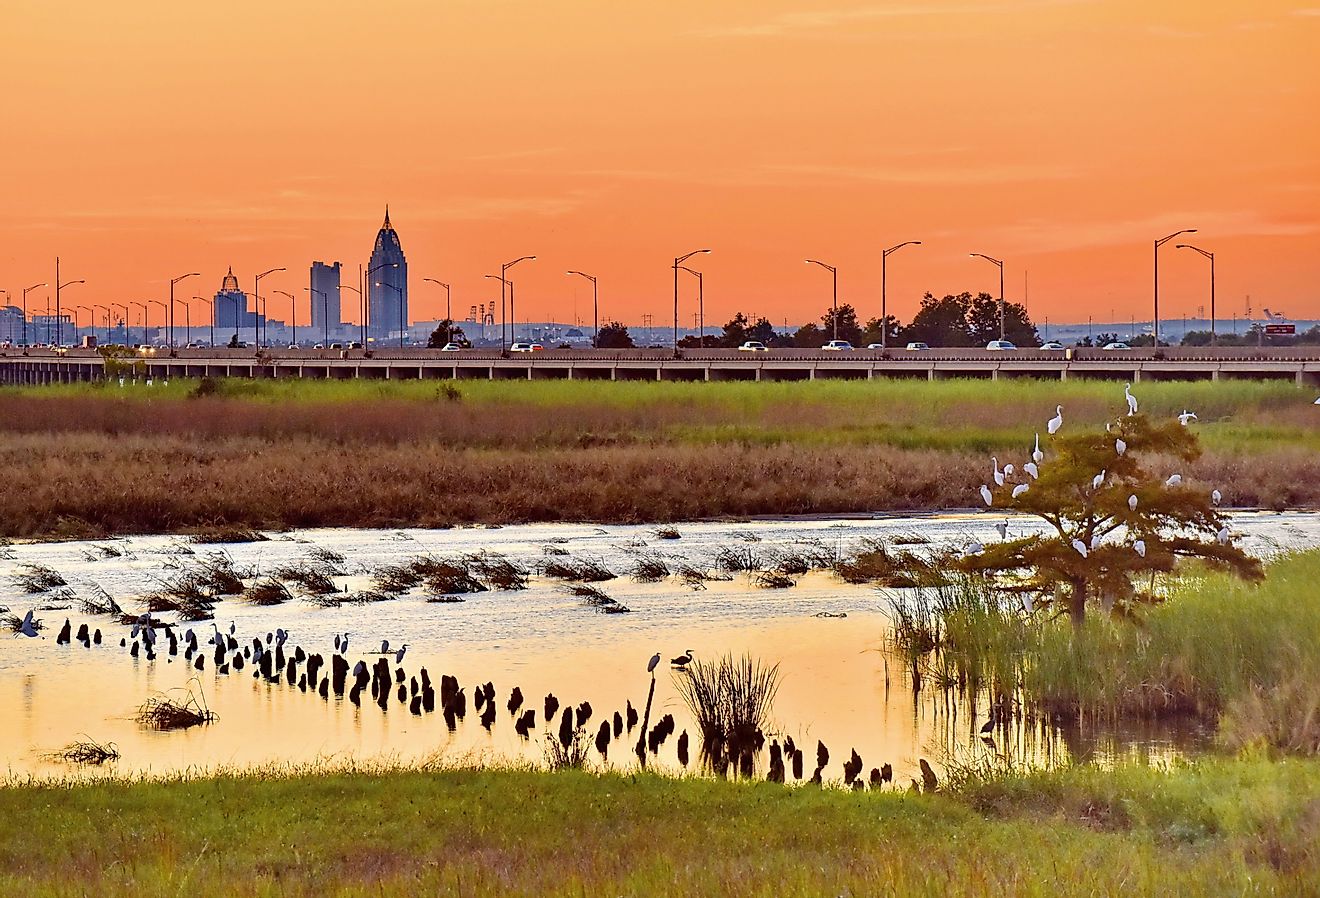 Sun setting over Mobile, Alabama skyline with busy Interstate traffic contrasted with the serenity of herons and egrets settling in for the evening on the Bay. Image credit Angie Carn via Shutterstock.